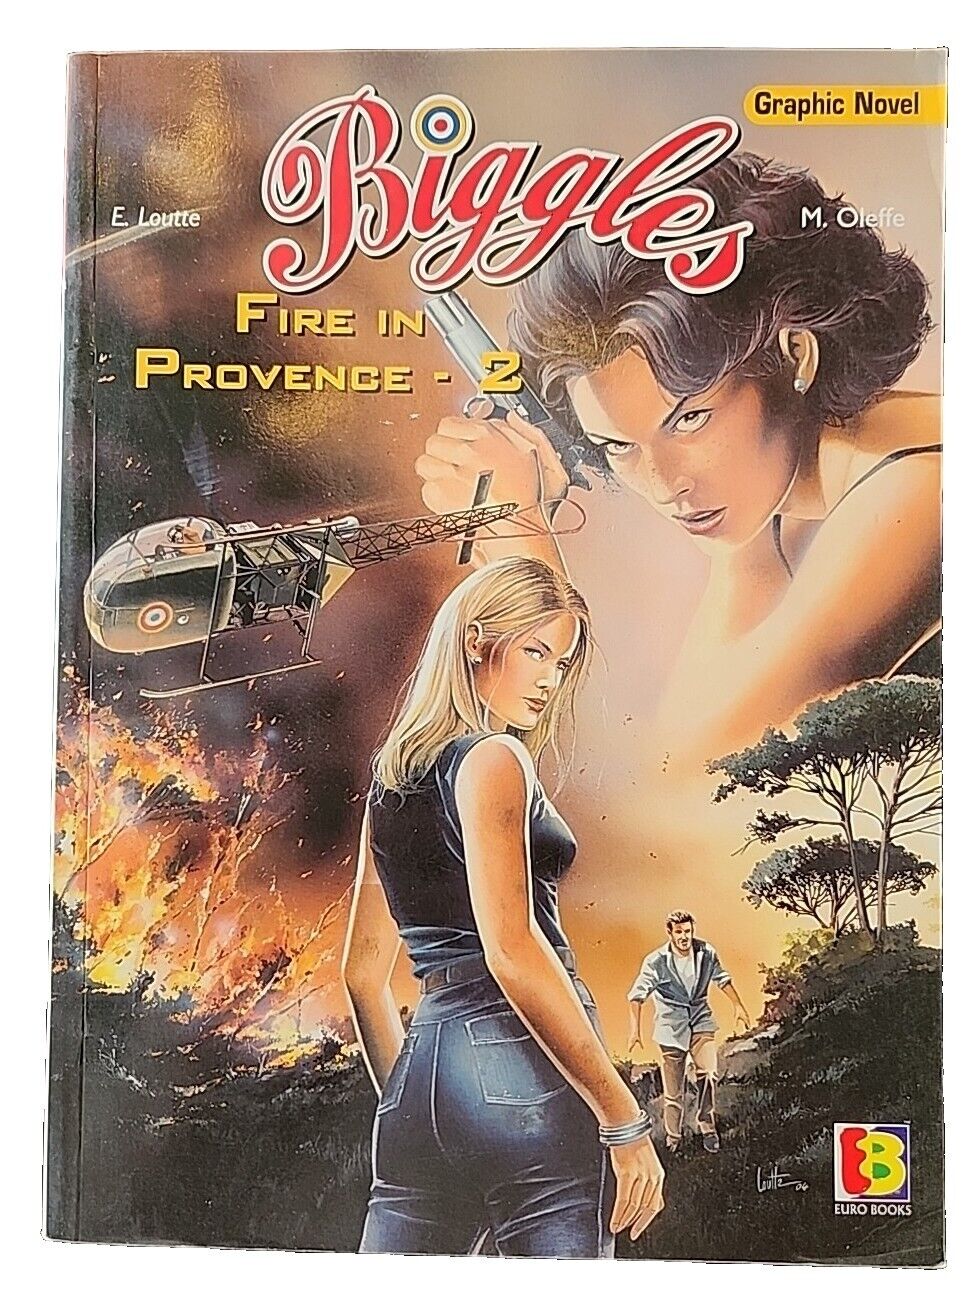 Biggles***Very Rare***Graphic Novel: Fire In Provence 2